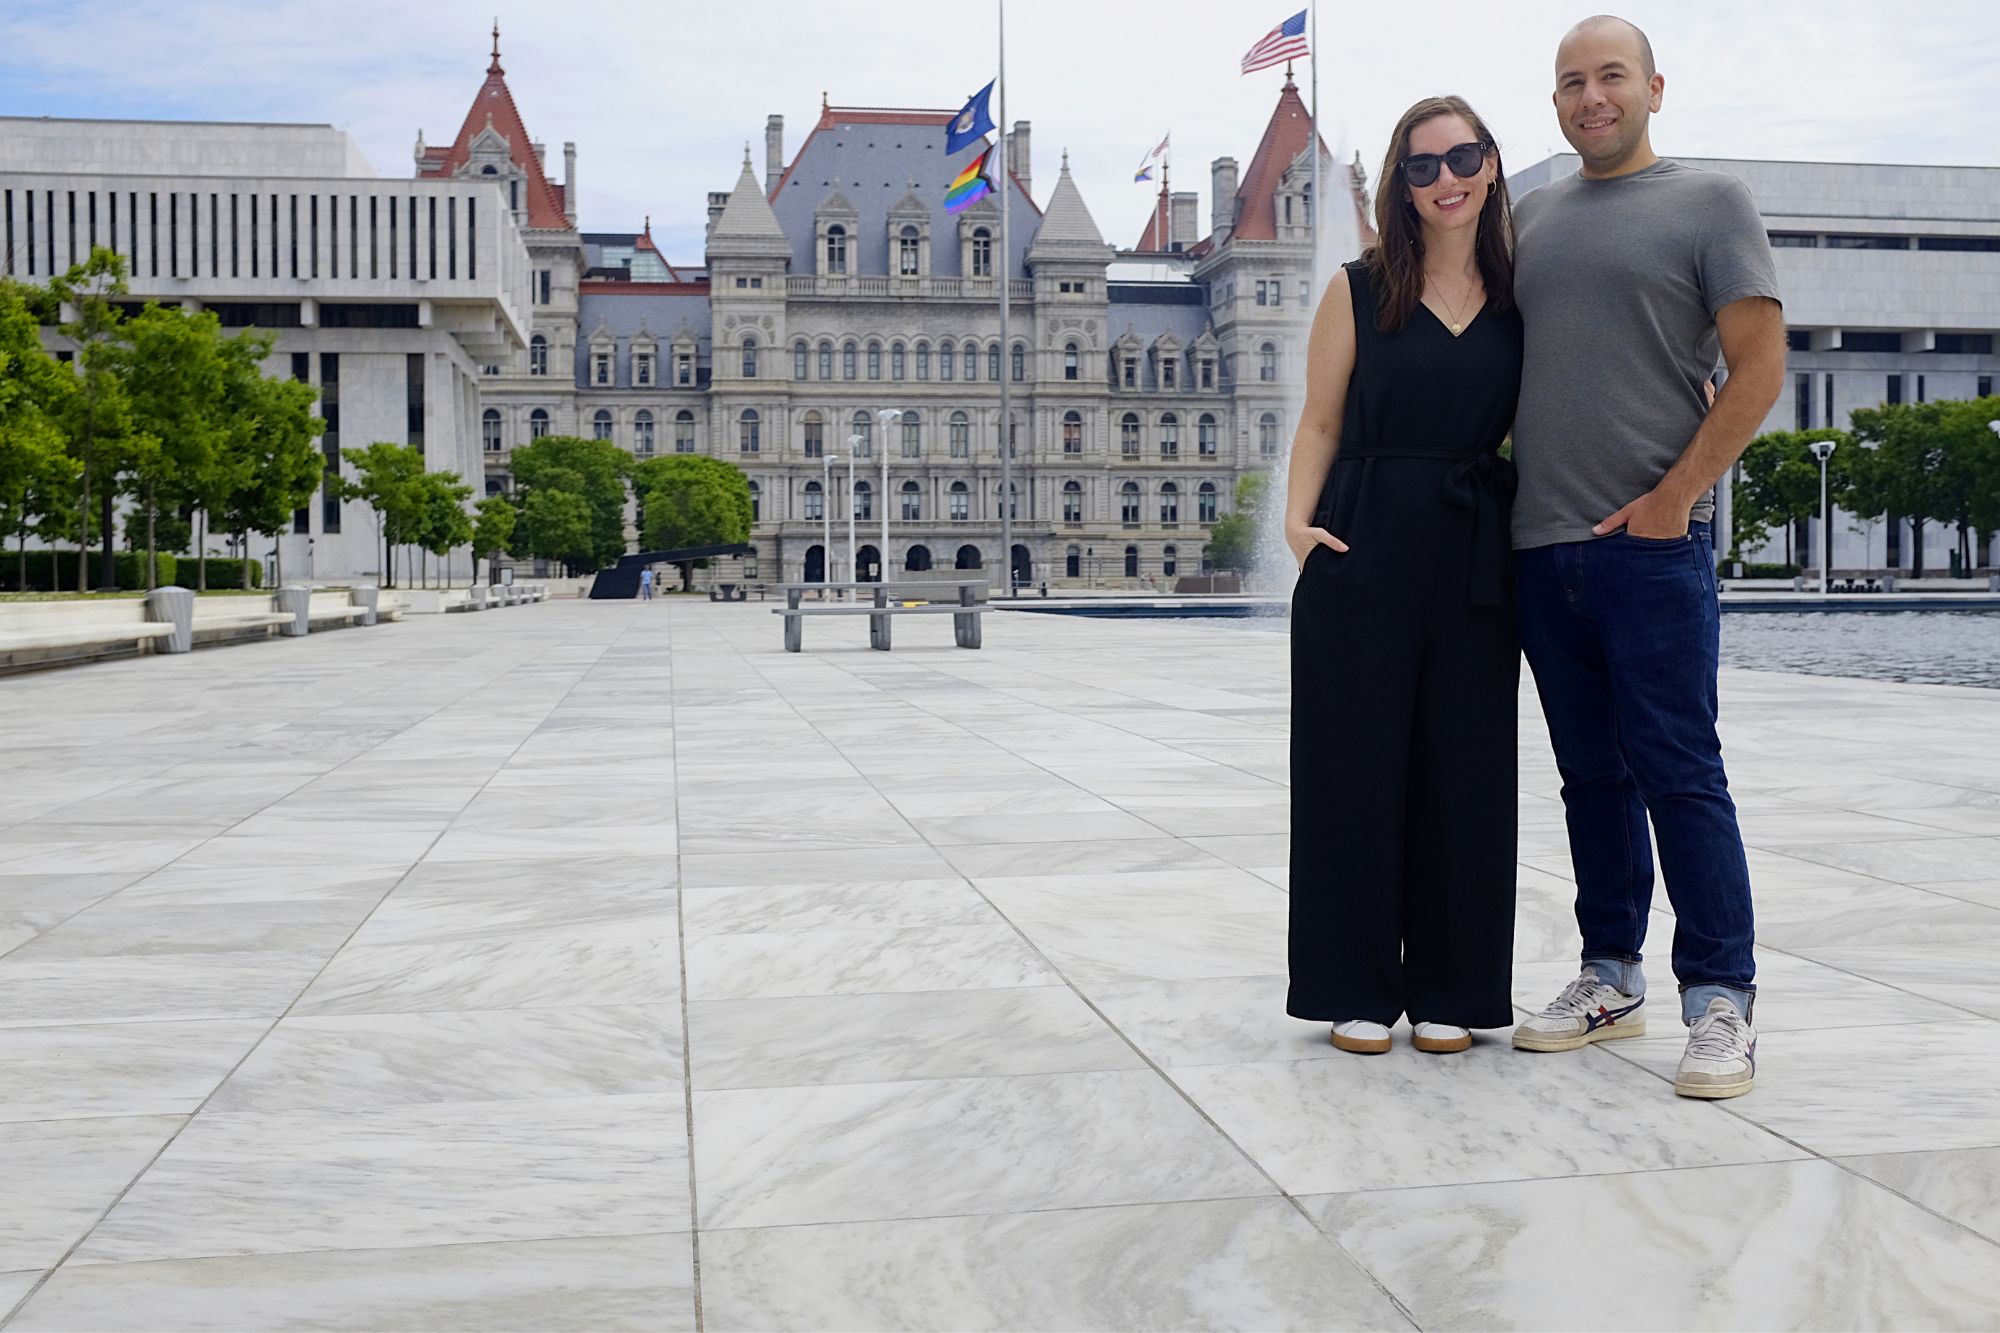 Alyssa and Michael stand in front of the NY state capitol building